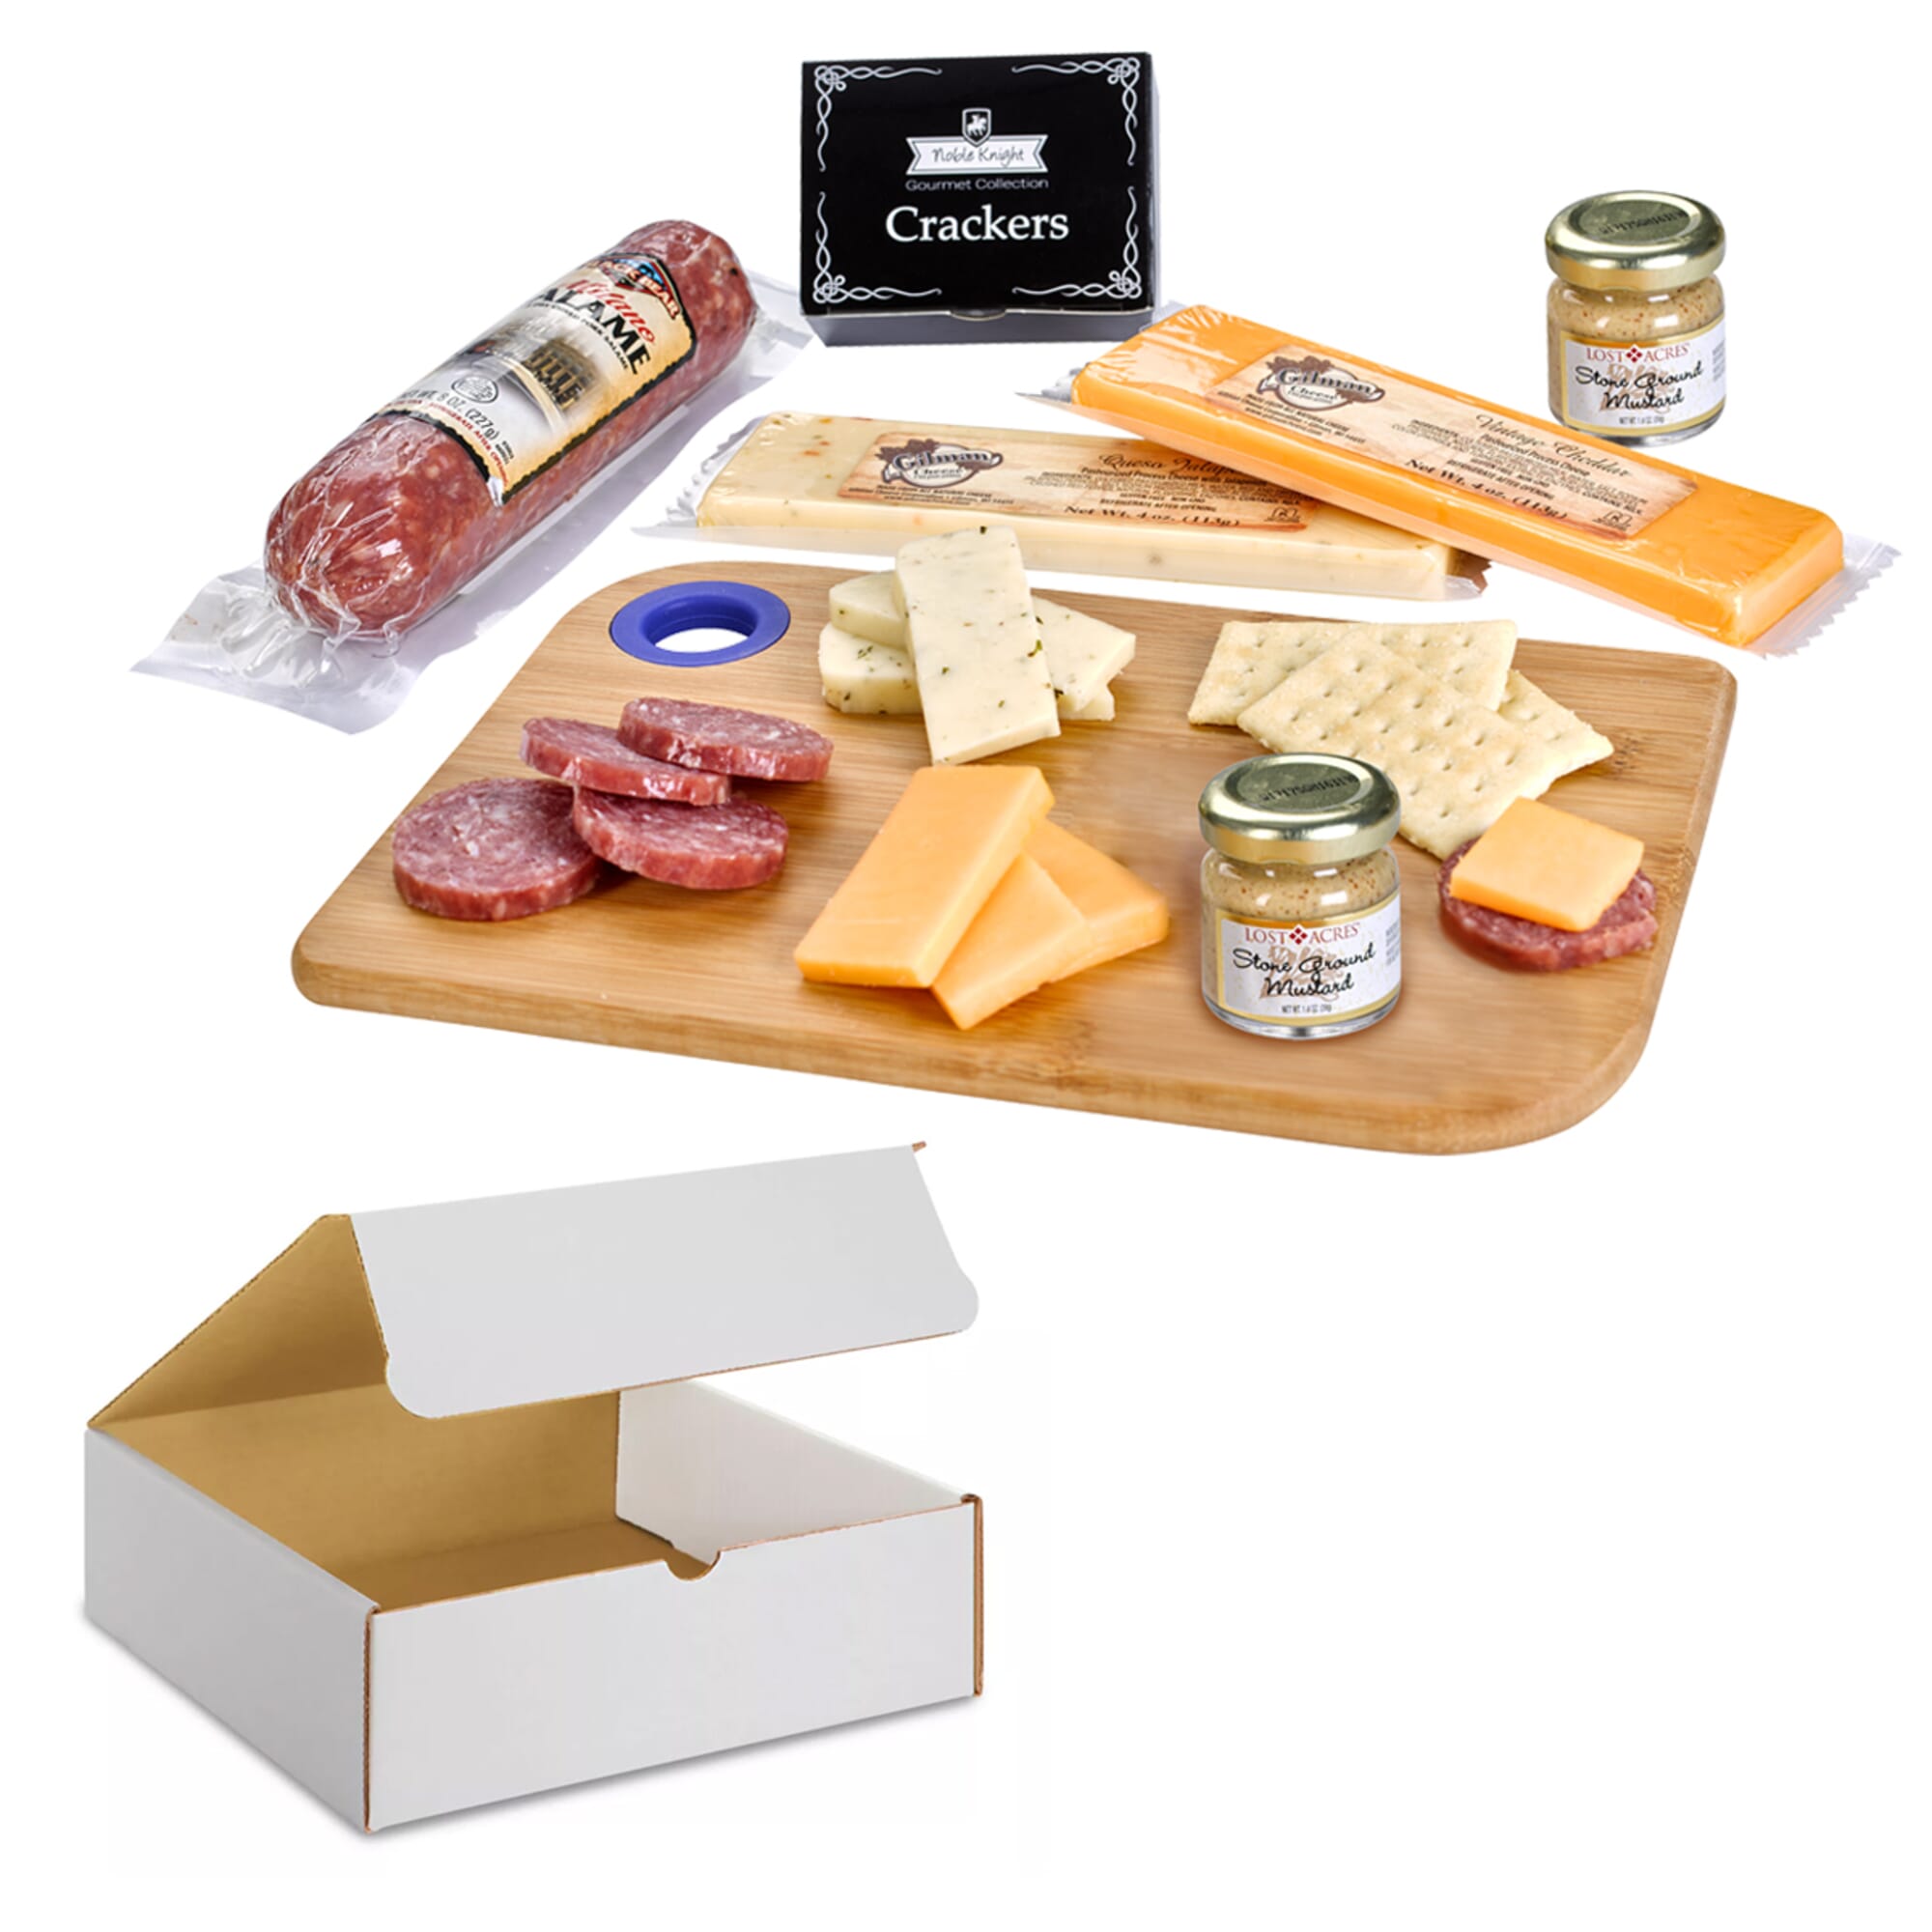 Charcuterie Favorites Board of Meat & Cheese Set with Greeting Card